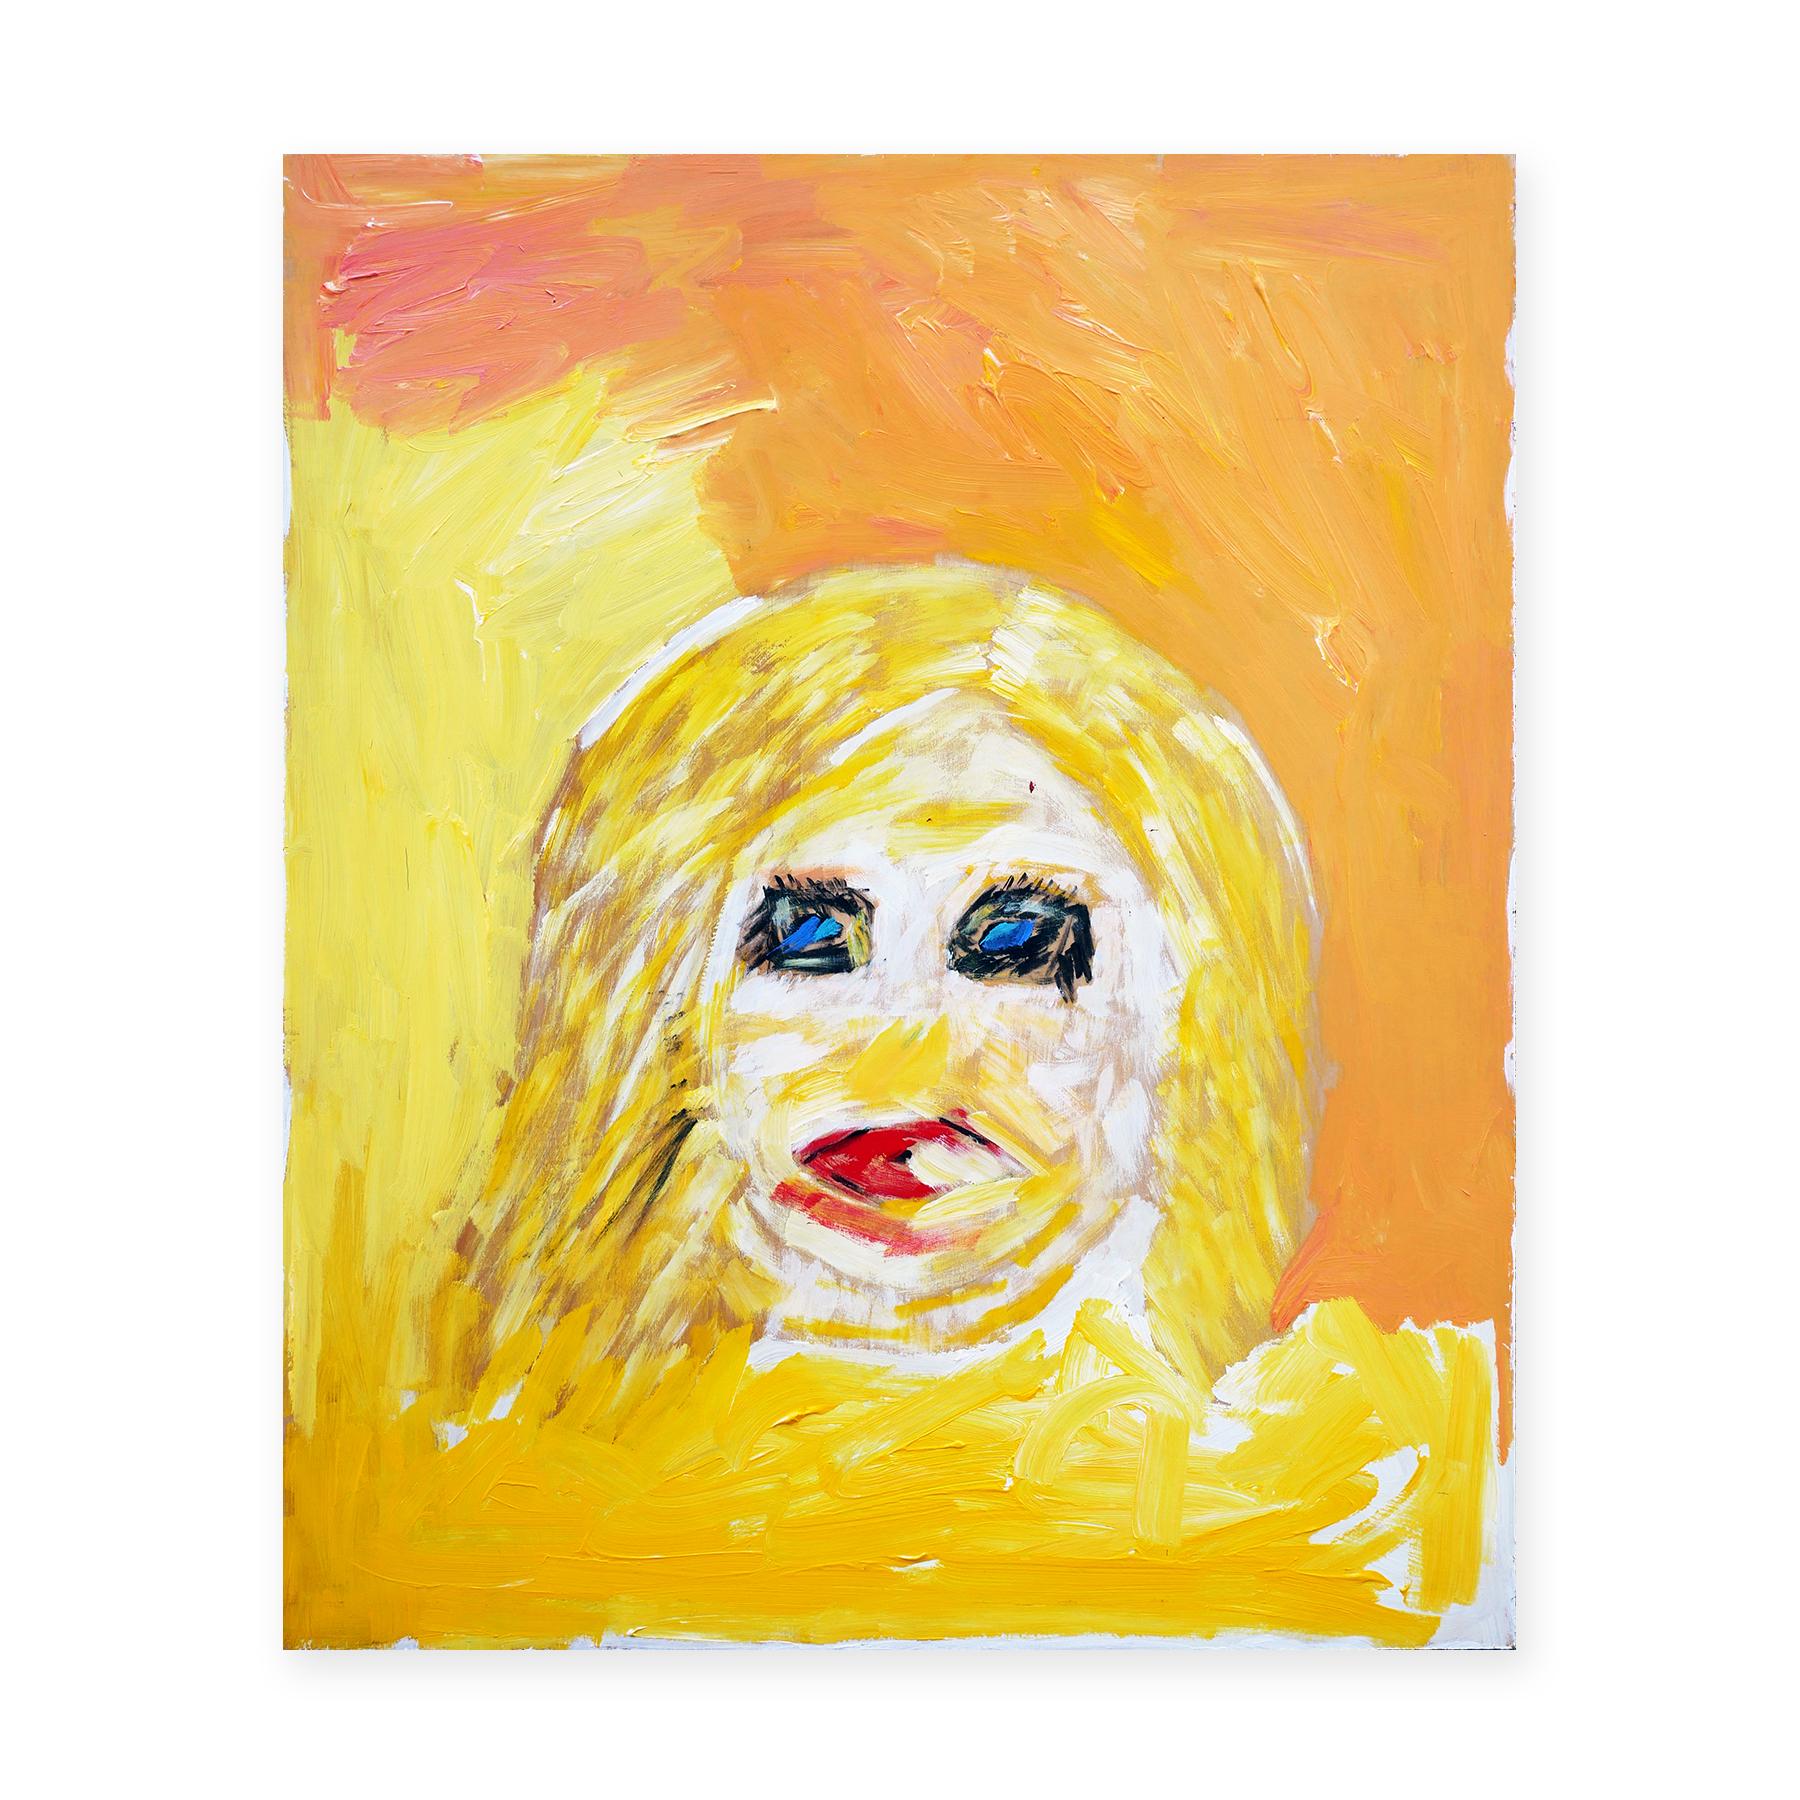 Paul Reeves - Orange and Yellow-Toned Abstract Figurative Portrait of a  Blonde Woman For Sale at 1stDibs